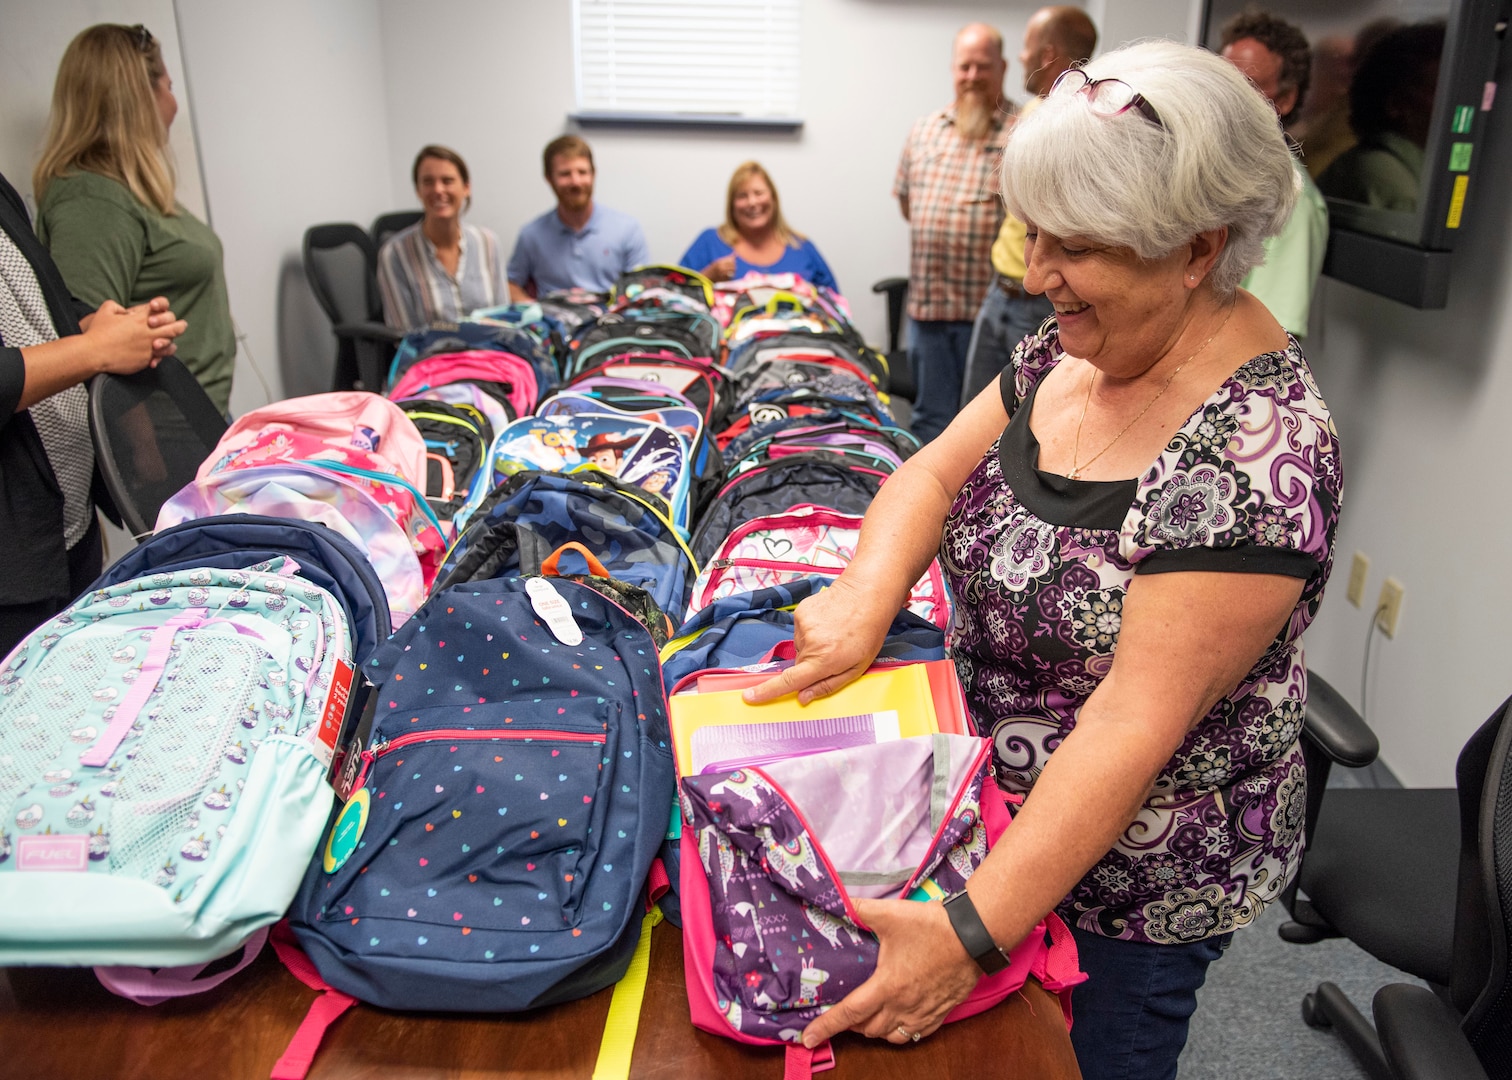 Paula Oliver, administrative assistant at the Naval Surface Warfare Center Panama City Division (NSWC PCD), gathers with other command volunteers to inventory this year’s increase in donations for NSWC PCD’s annual Back to School Supply Drive.